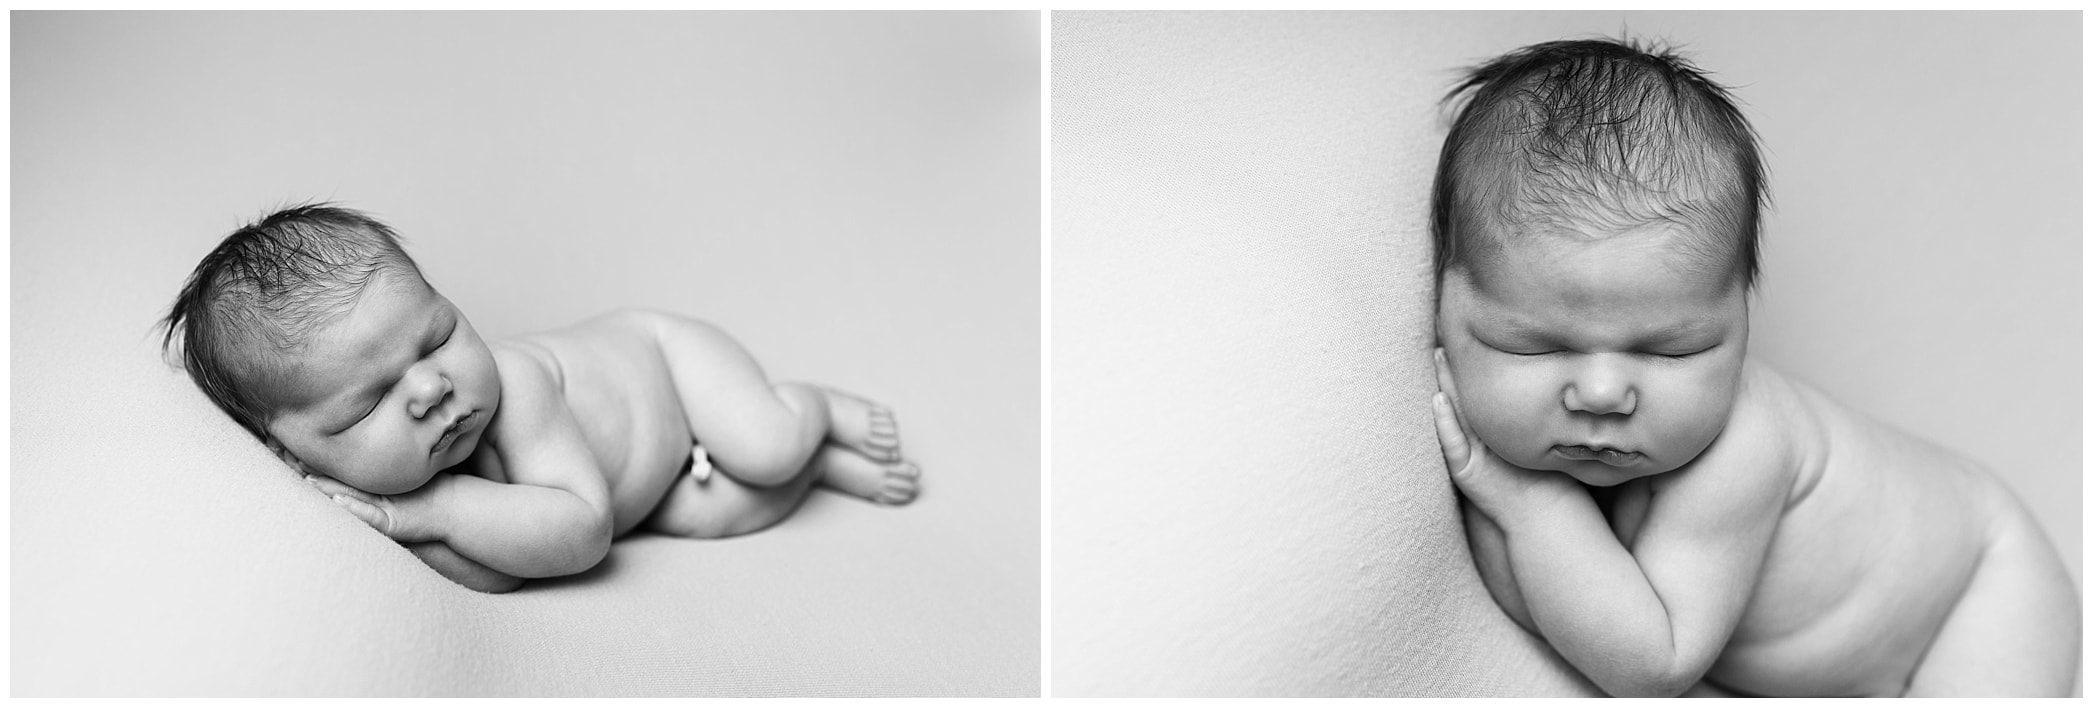 Black and white image of newborn baby in side pose